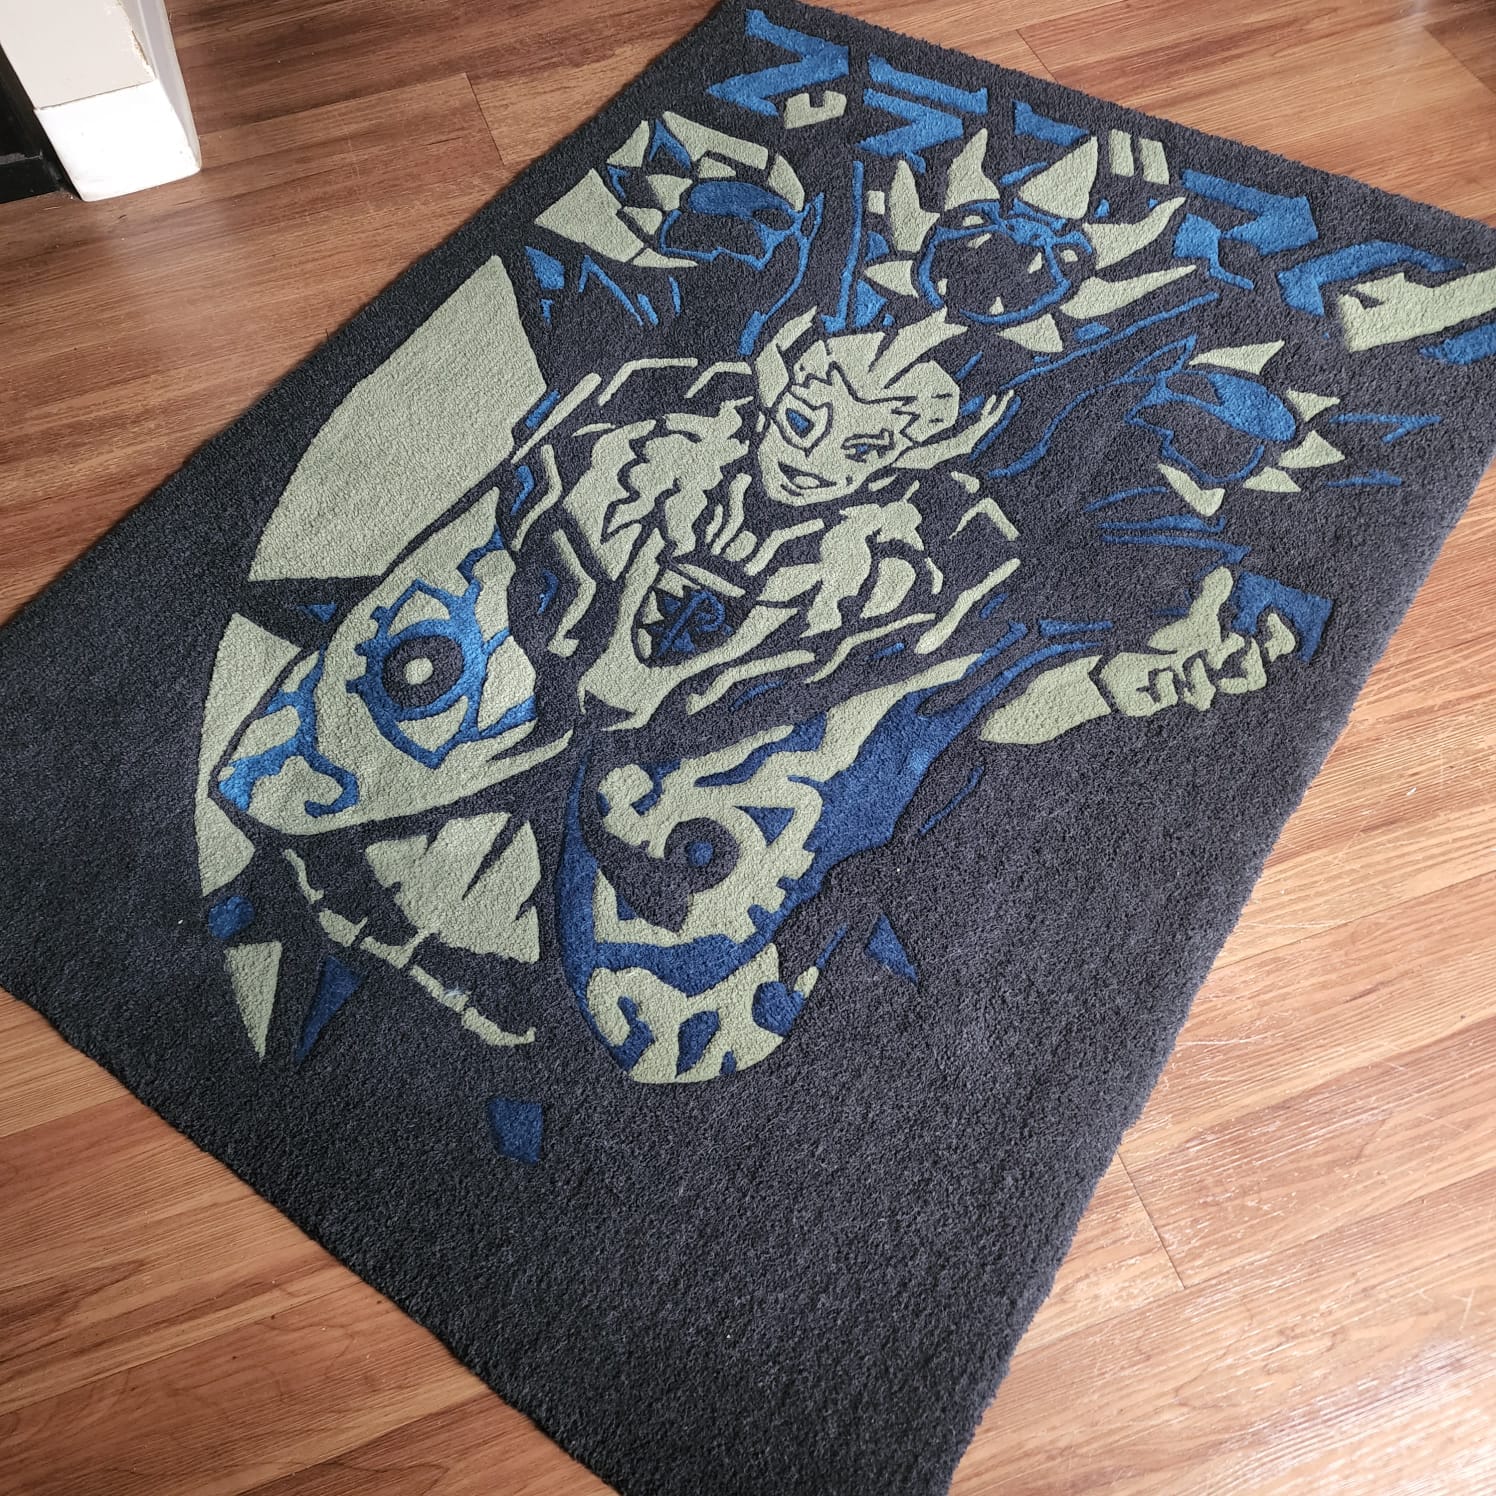 How to finish a rug – Tuftinglove Helpcenter